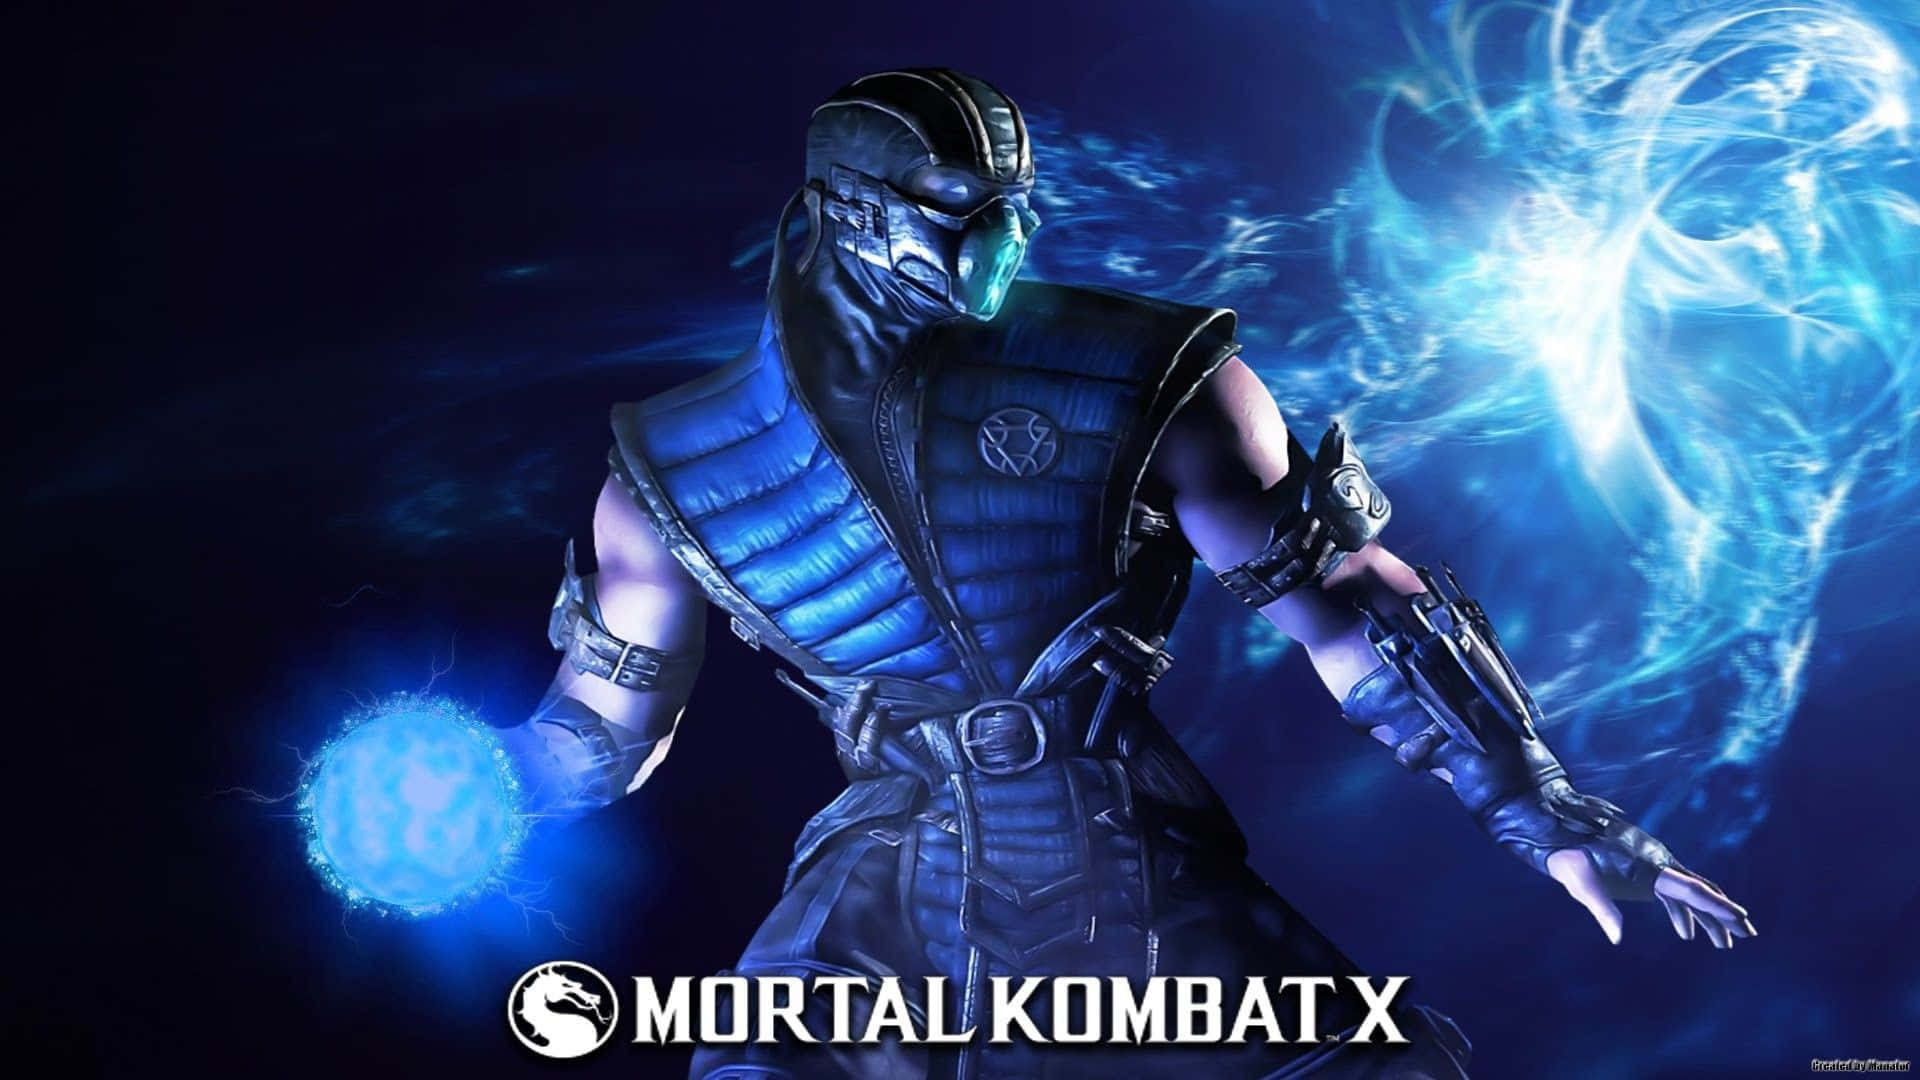 The Mortal Kombat Series Characters Ready for a Battle